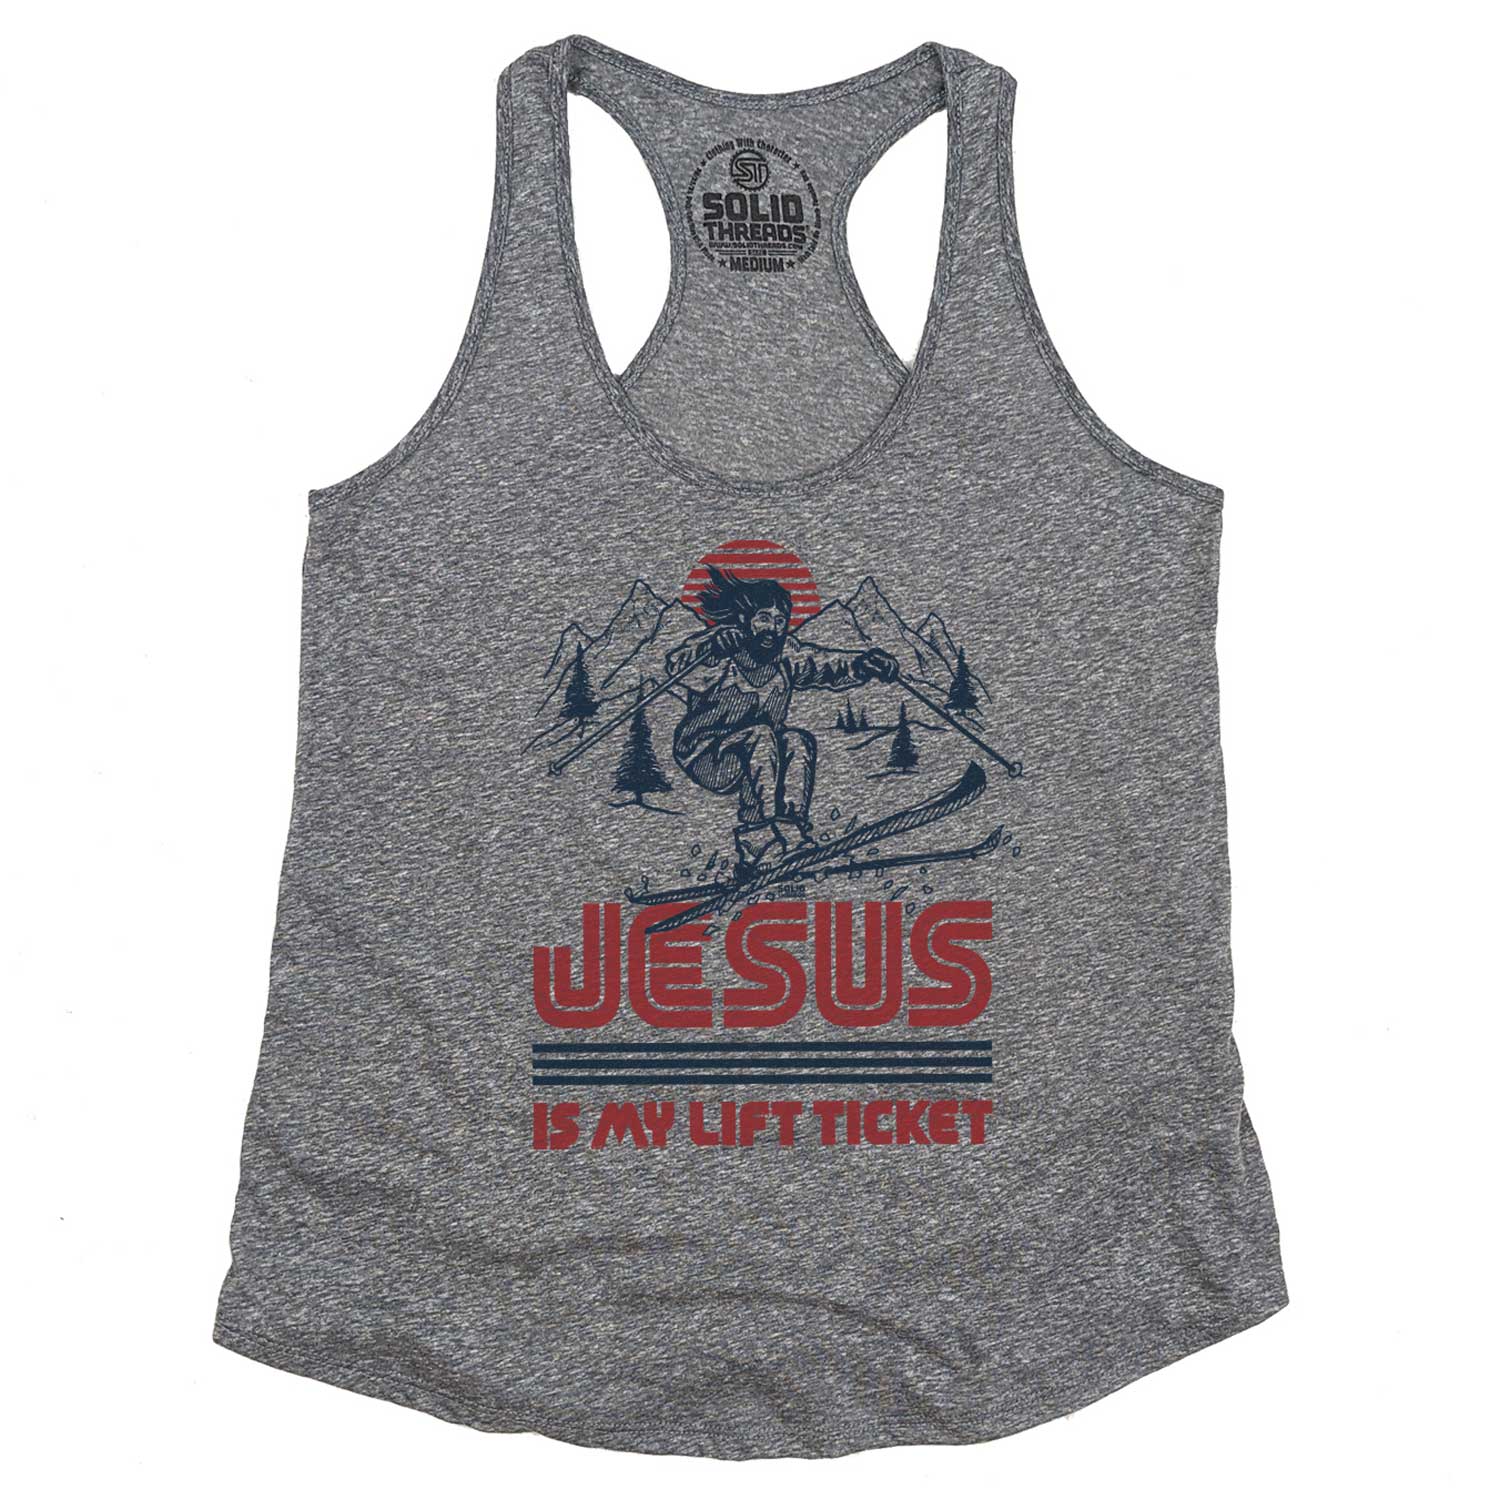 Women's Jesus is My Lift Ticket Vintage Graphic Tank Top | Funny Skiing T-shirt | Solid Threads